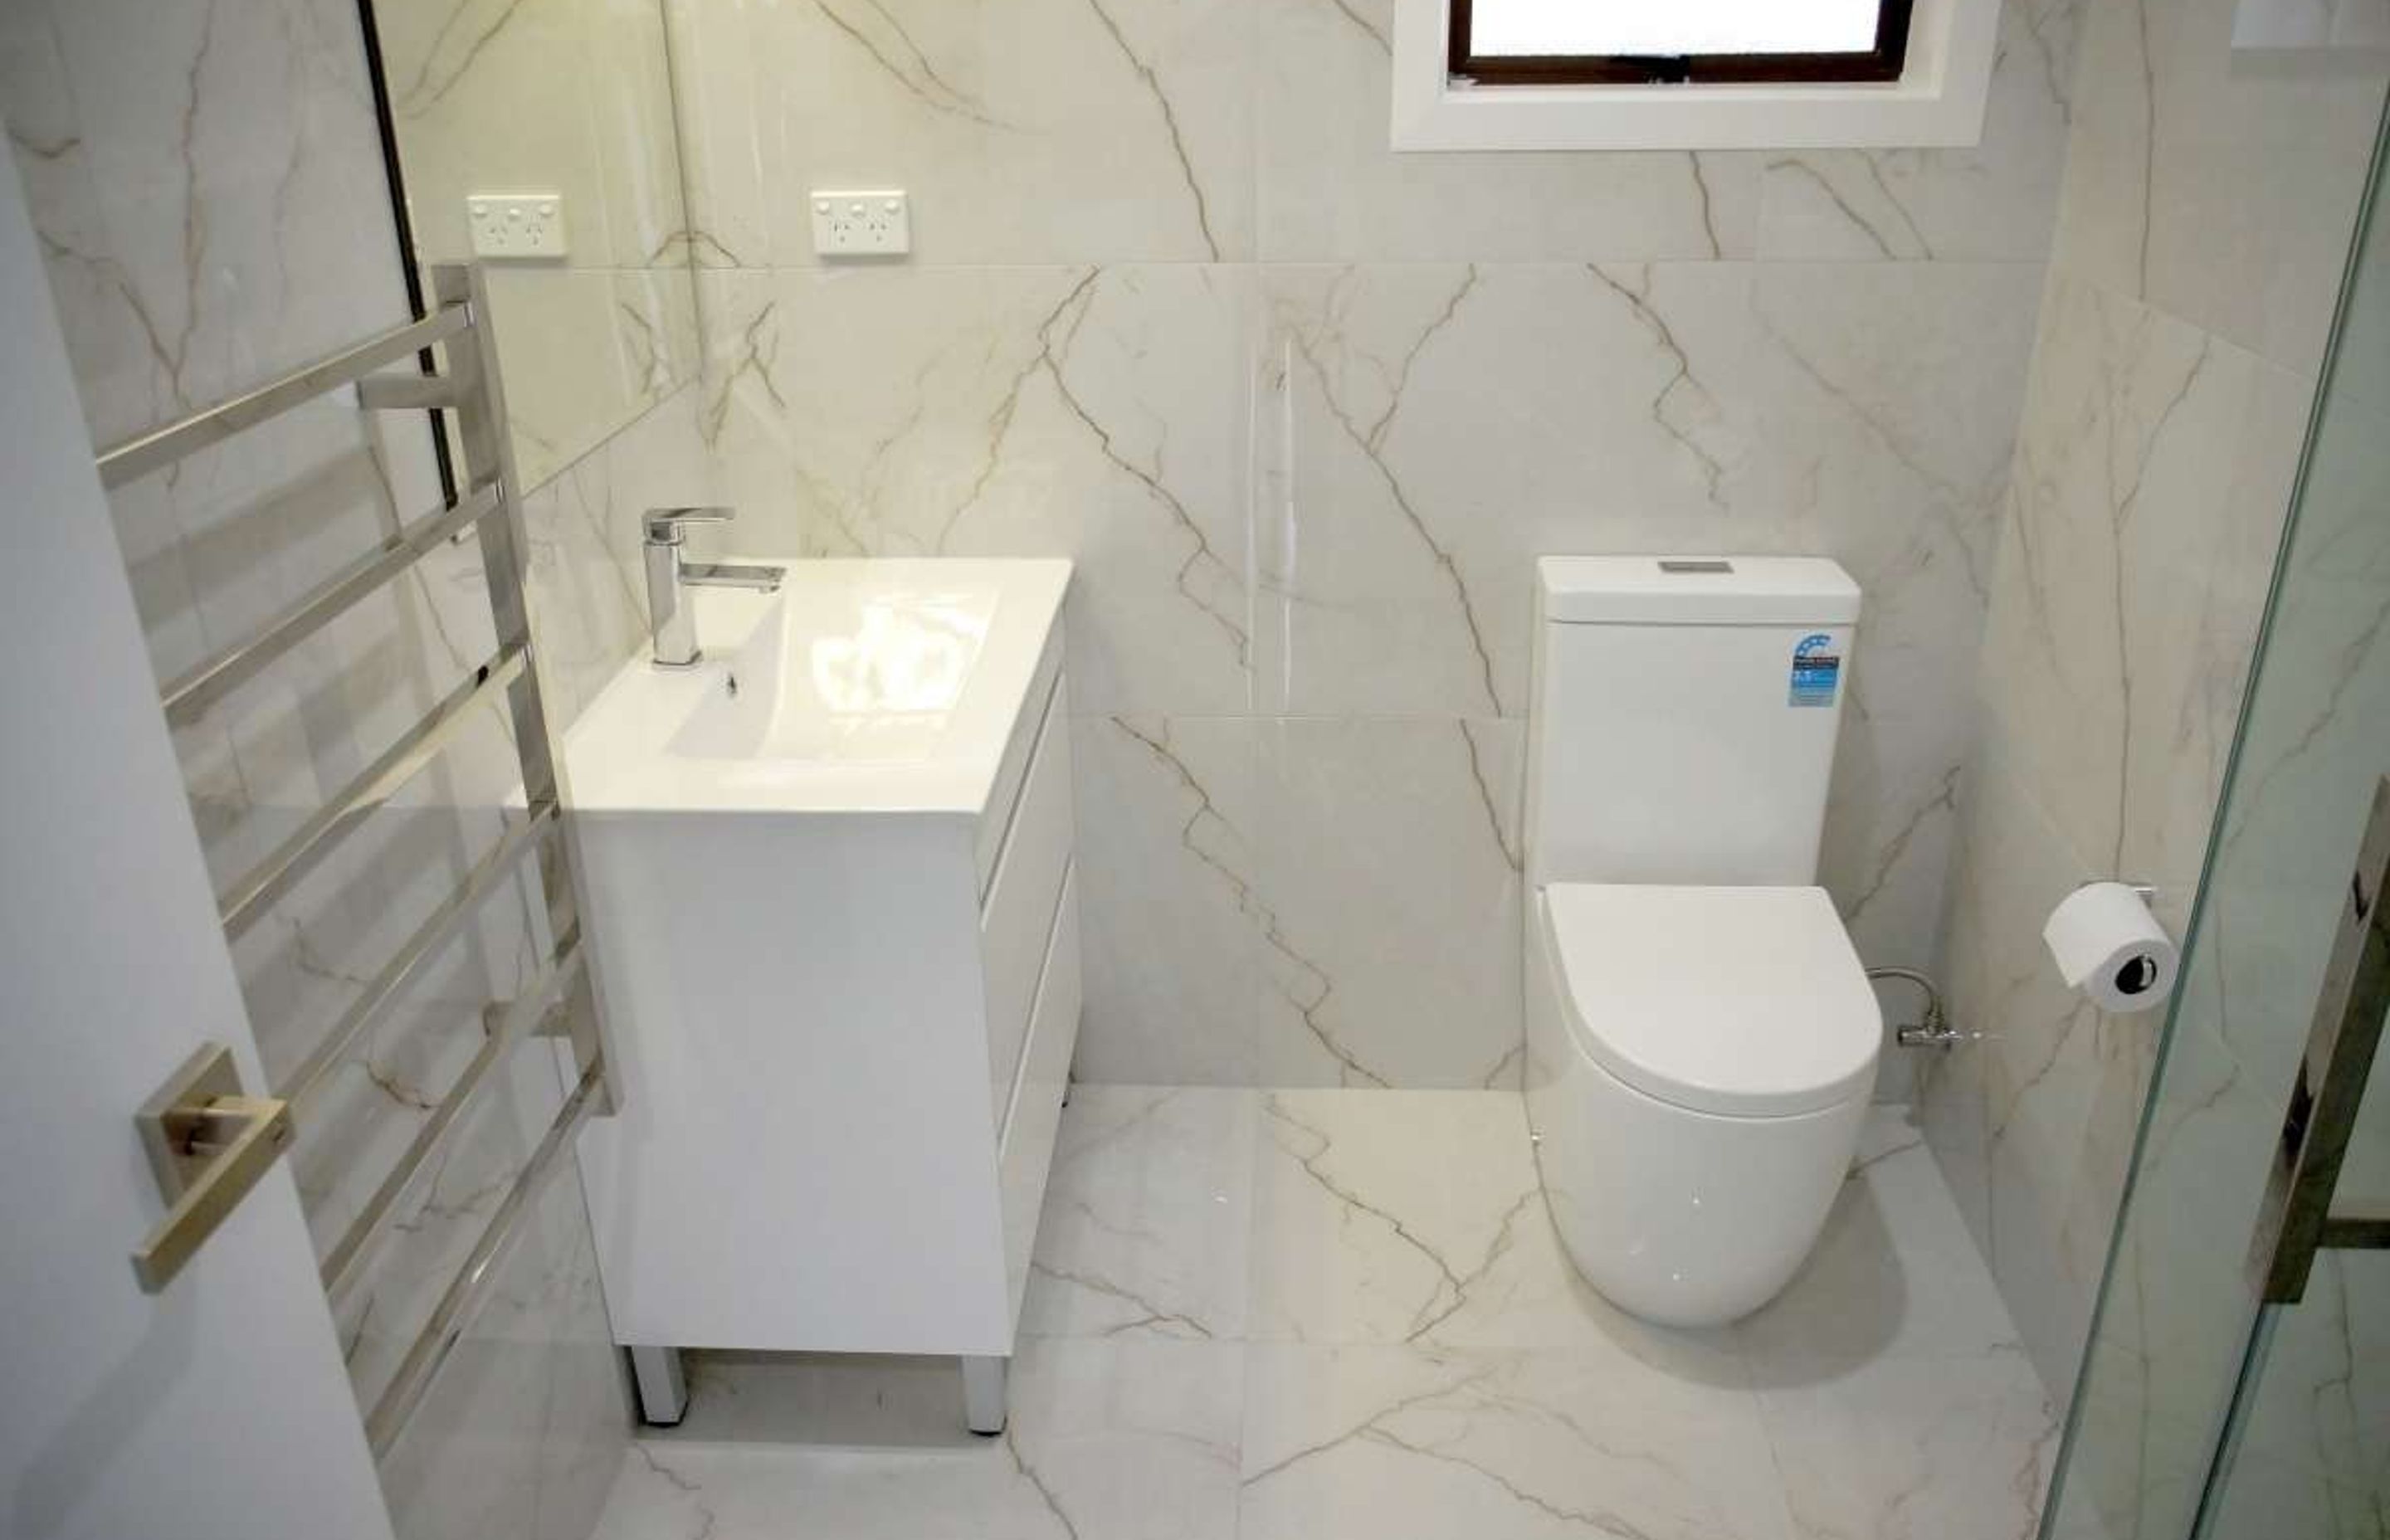 Bathroom renovation in Avondale. This ensuite features the same tiles on the floors and walls + L shaped corner shower, bathtub, vanity and toilet.